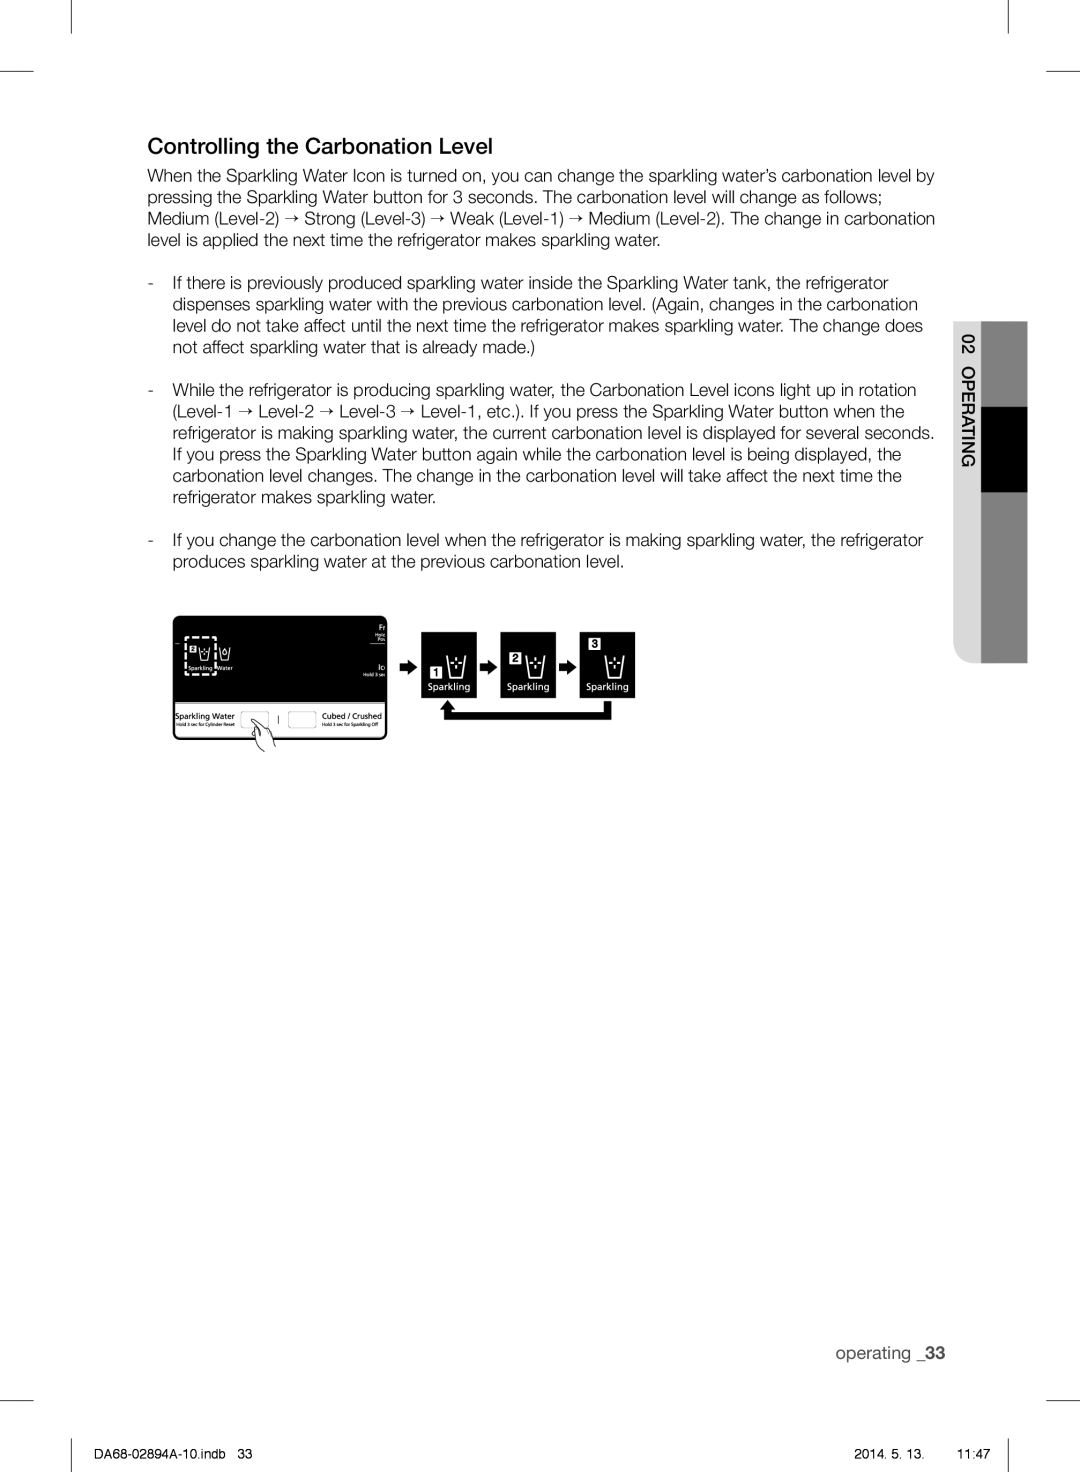 Samsung RF31FMESBSR user manual Controlling the Carbonation Level, operating _33 